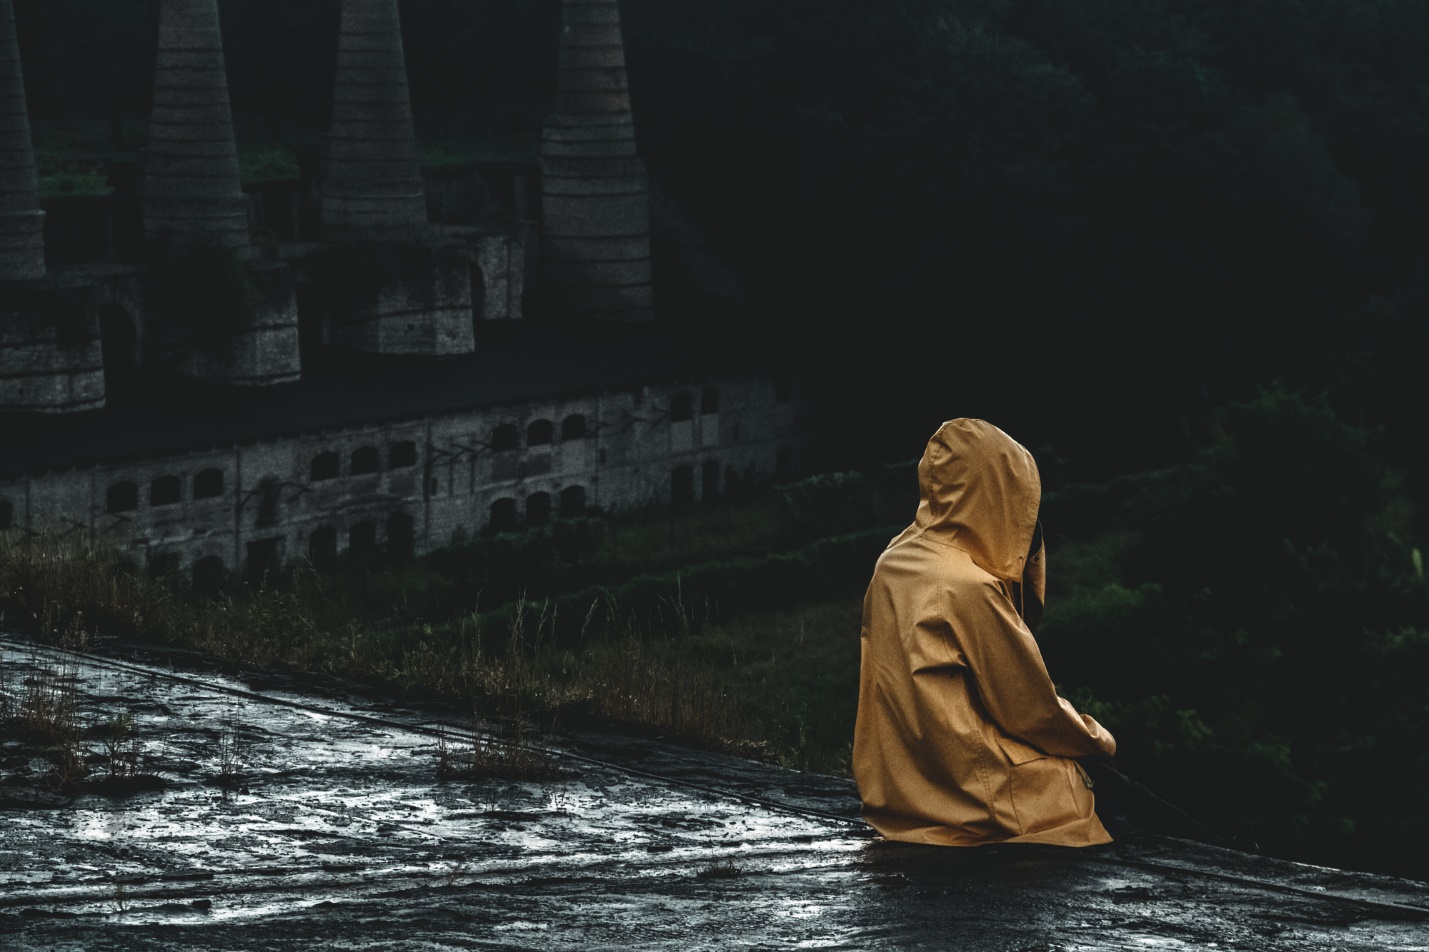 A person in a raincoat sitting on a wet surface

Description automatically generated